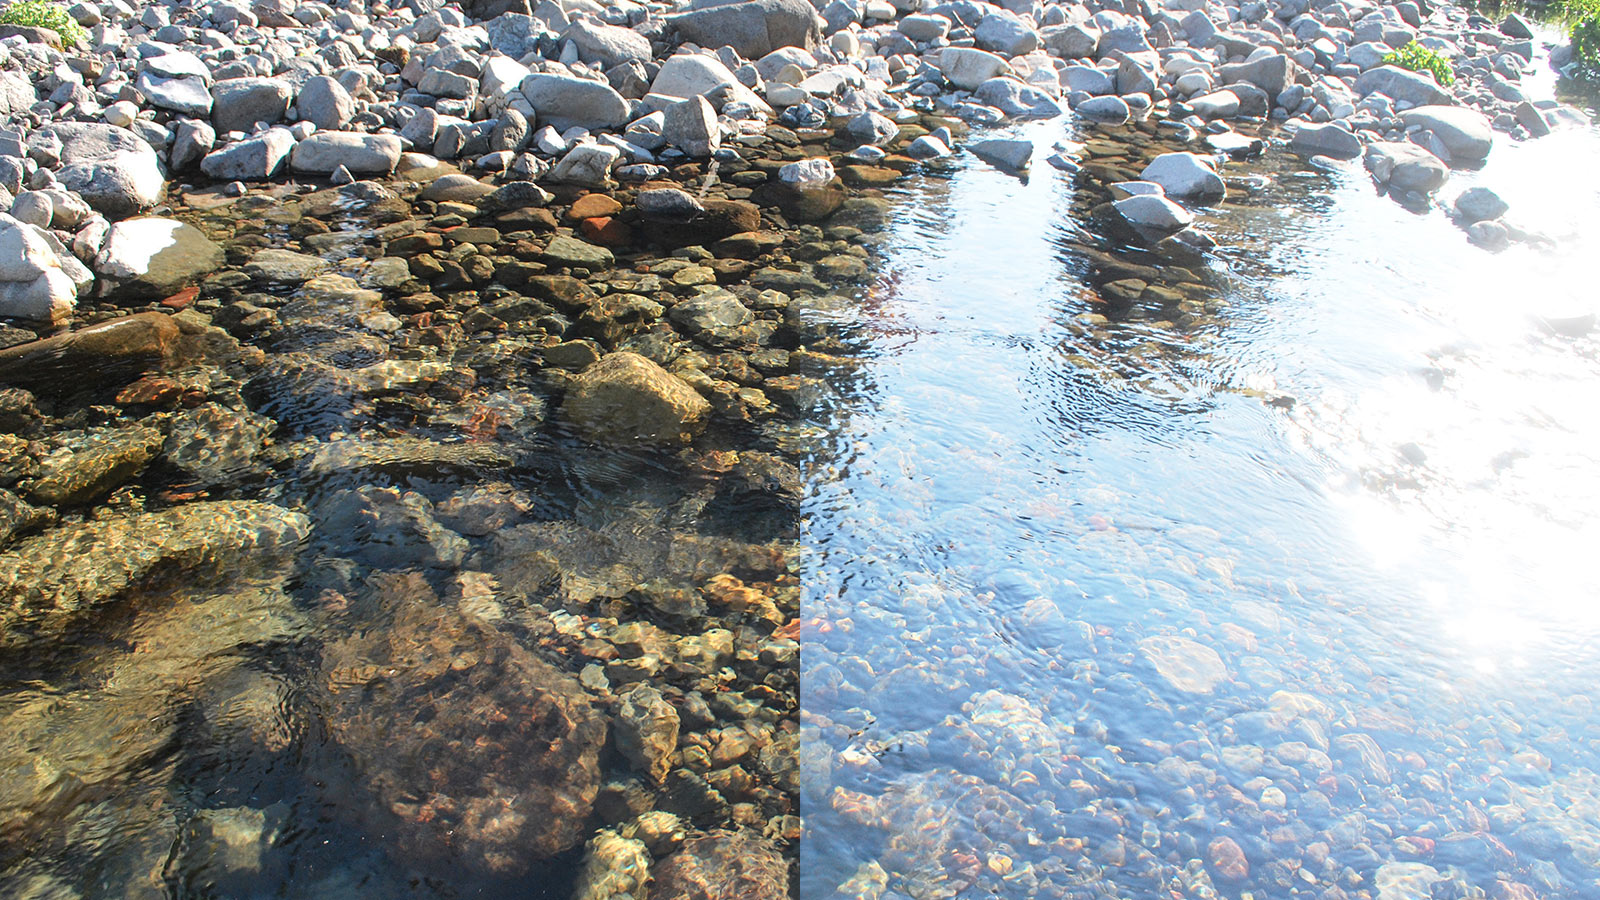 View with and without polarized lenses